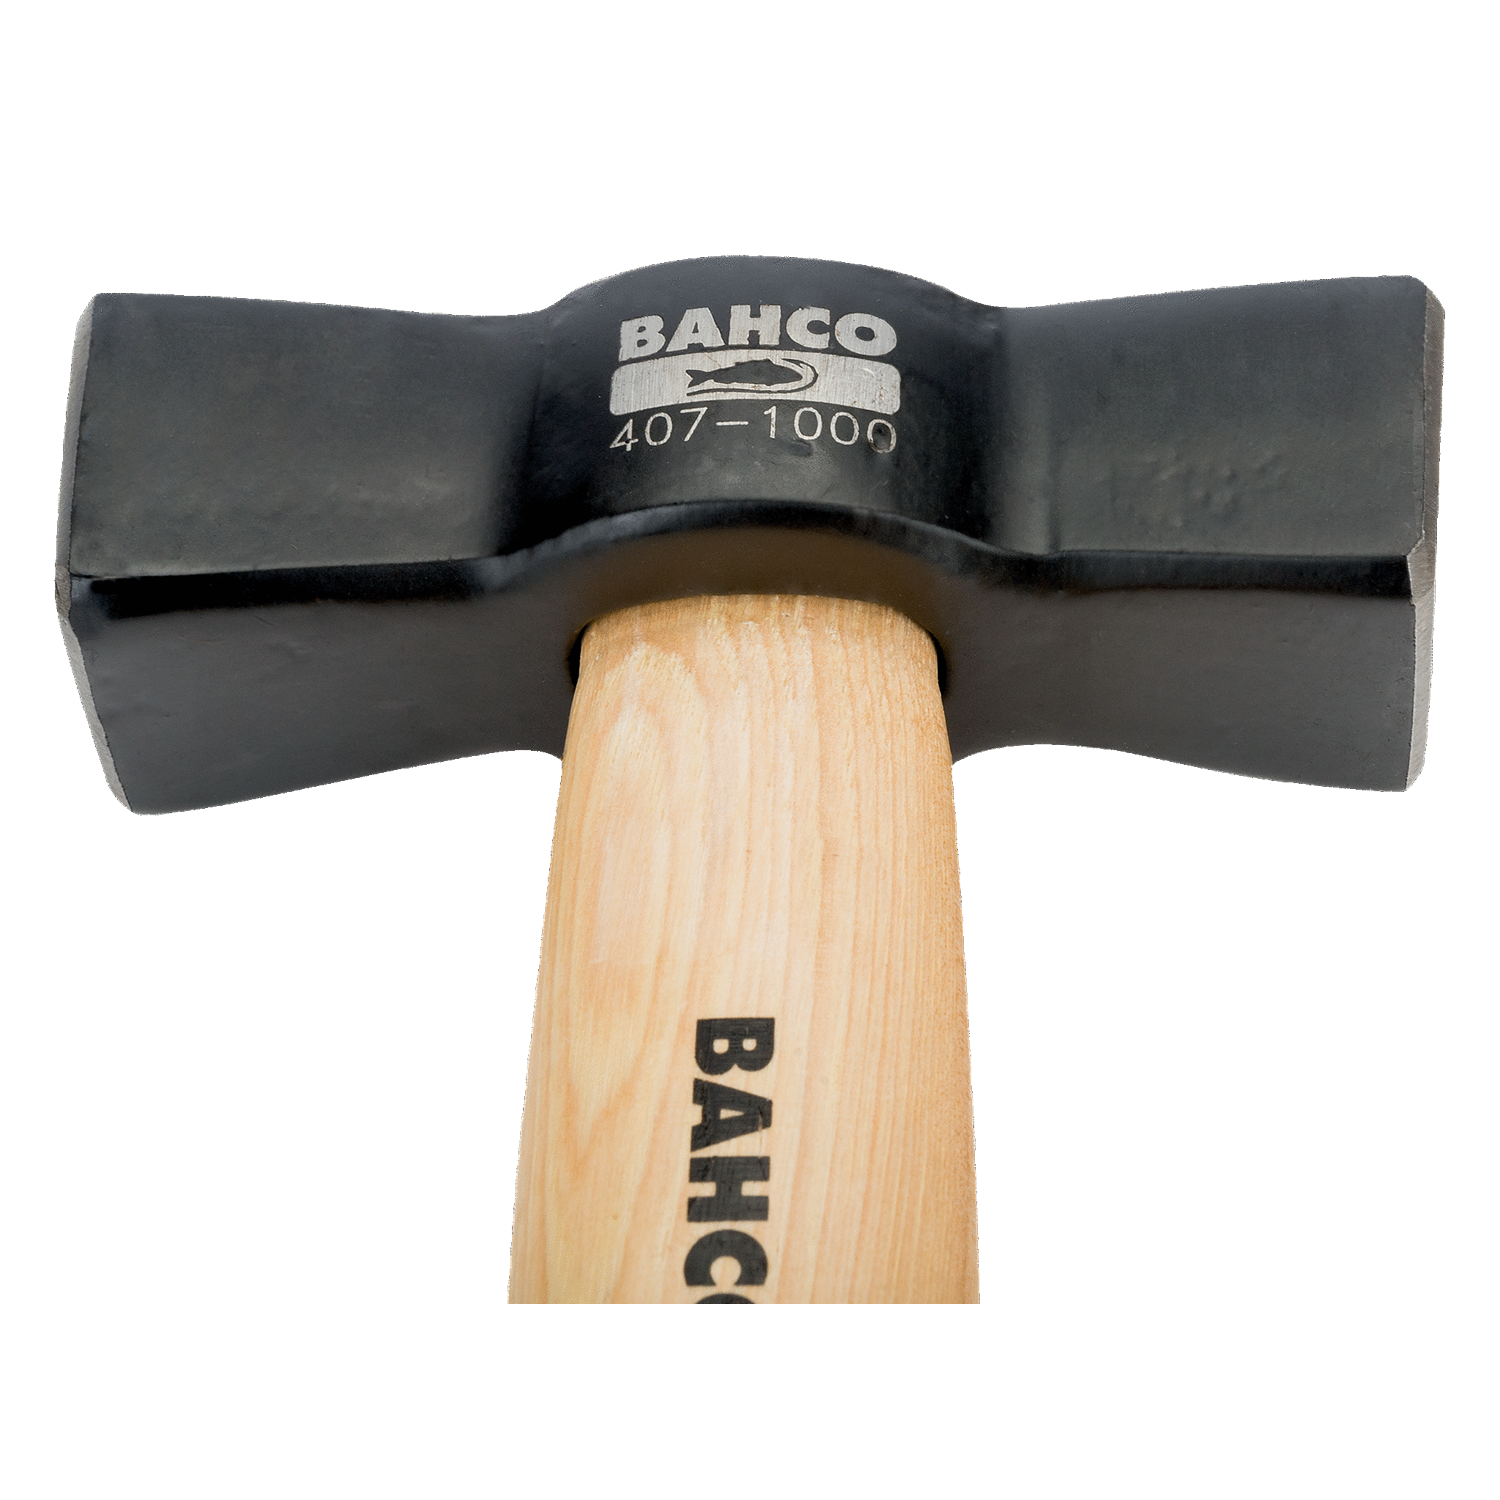 BAHCO 407 Club Hammer Spanish Type with Oval Eye (BAHCO Tools) - Premium Club Hammer from BAHCO - Shop now at Yew Aik.